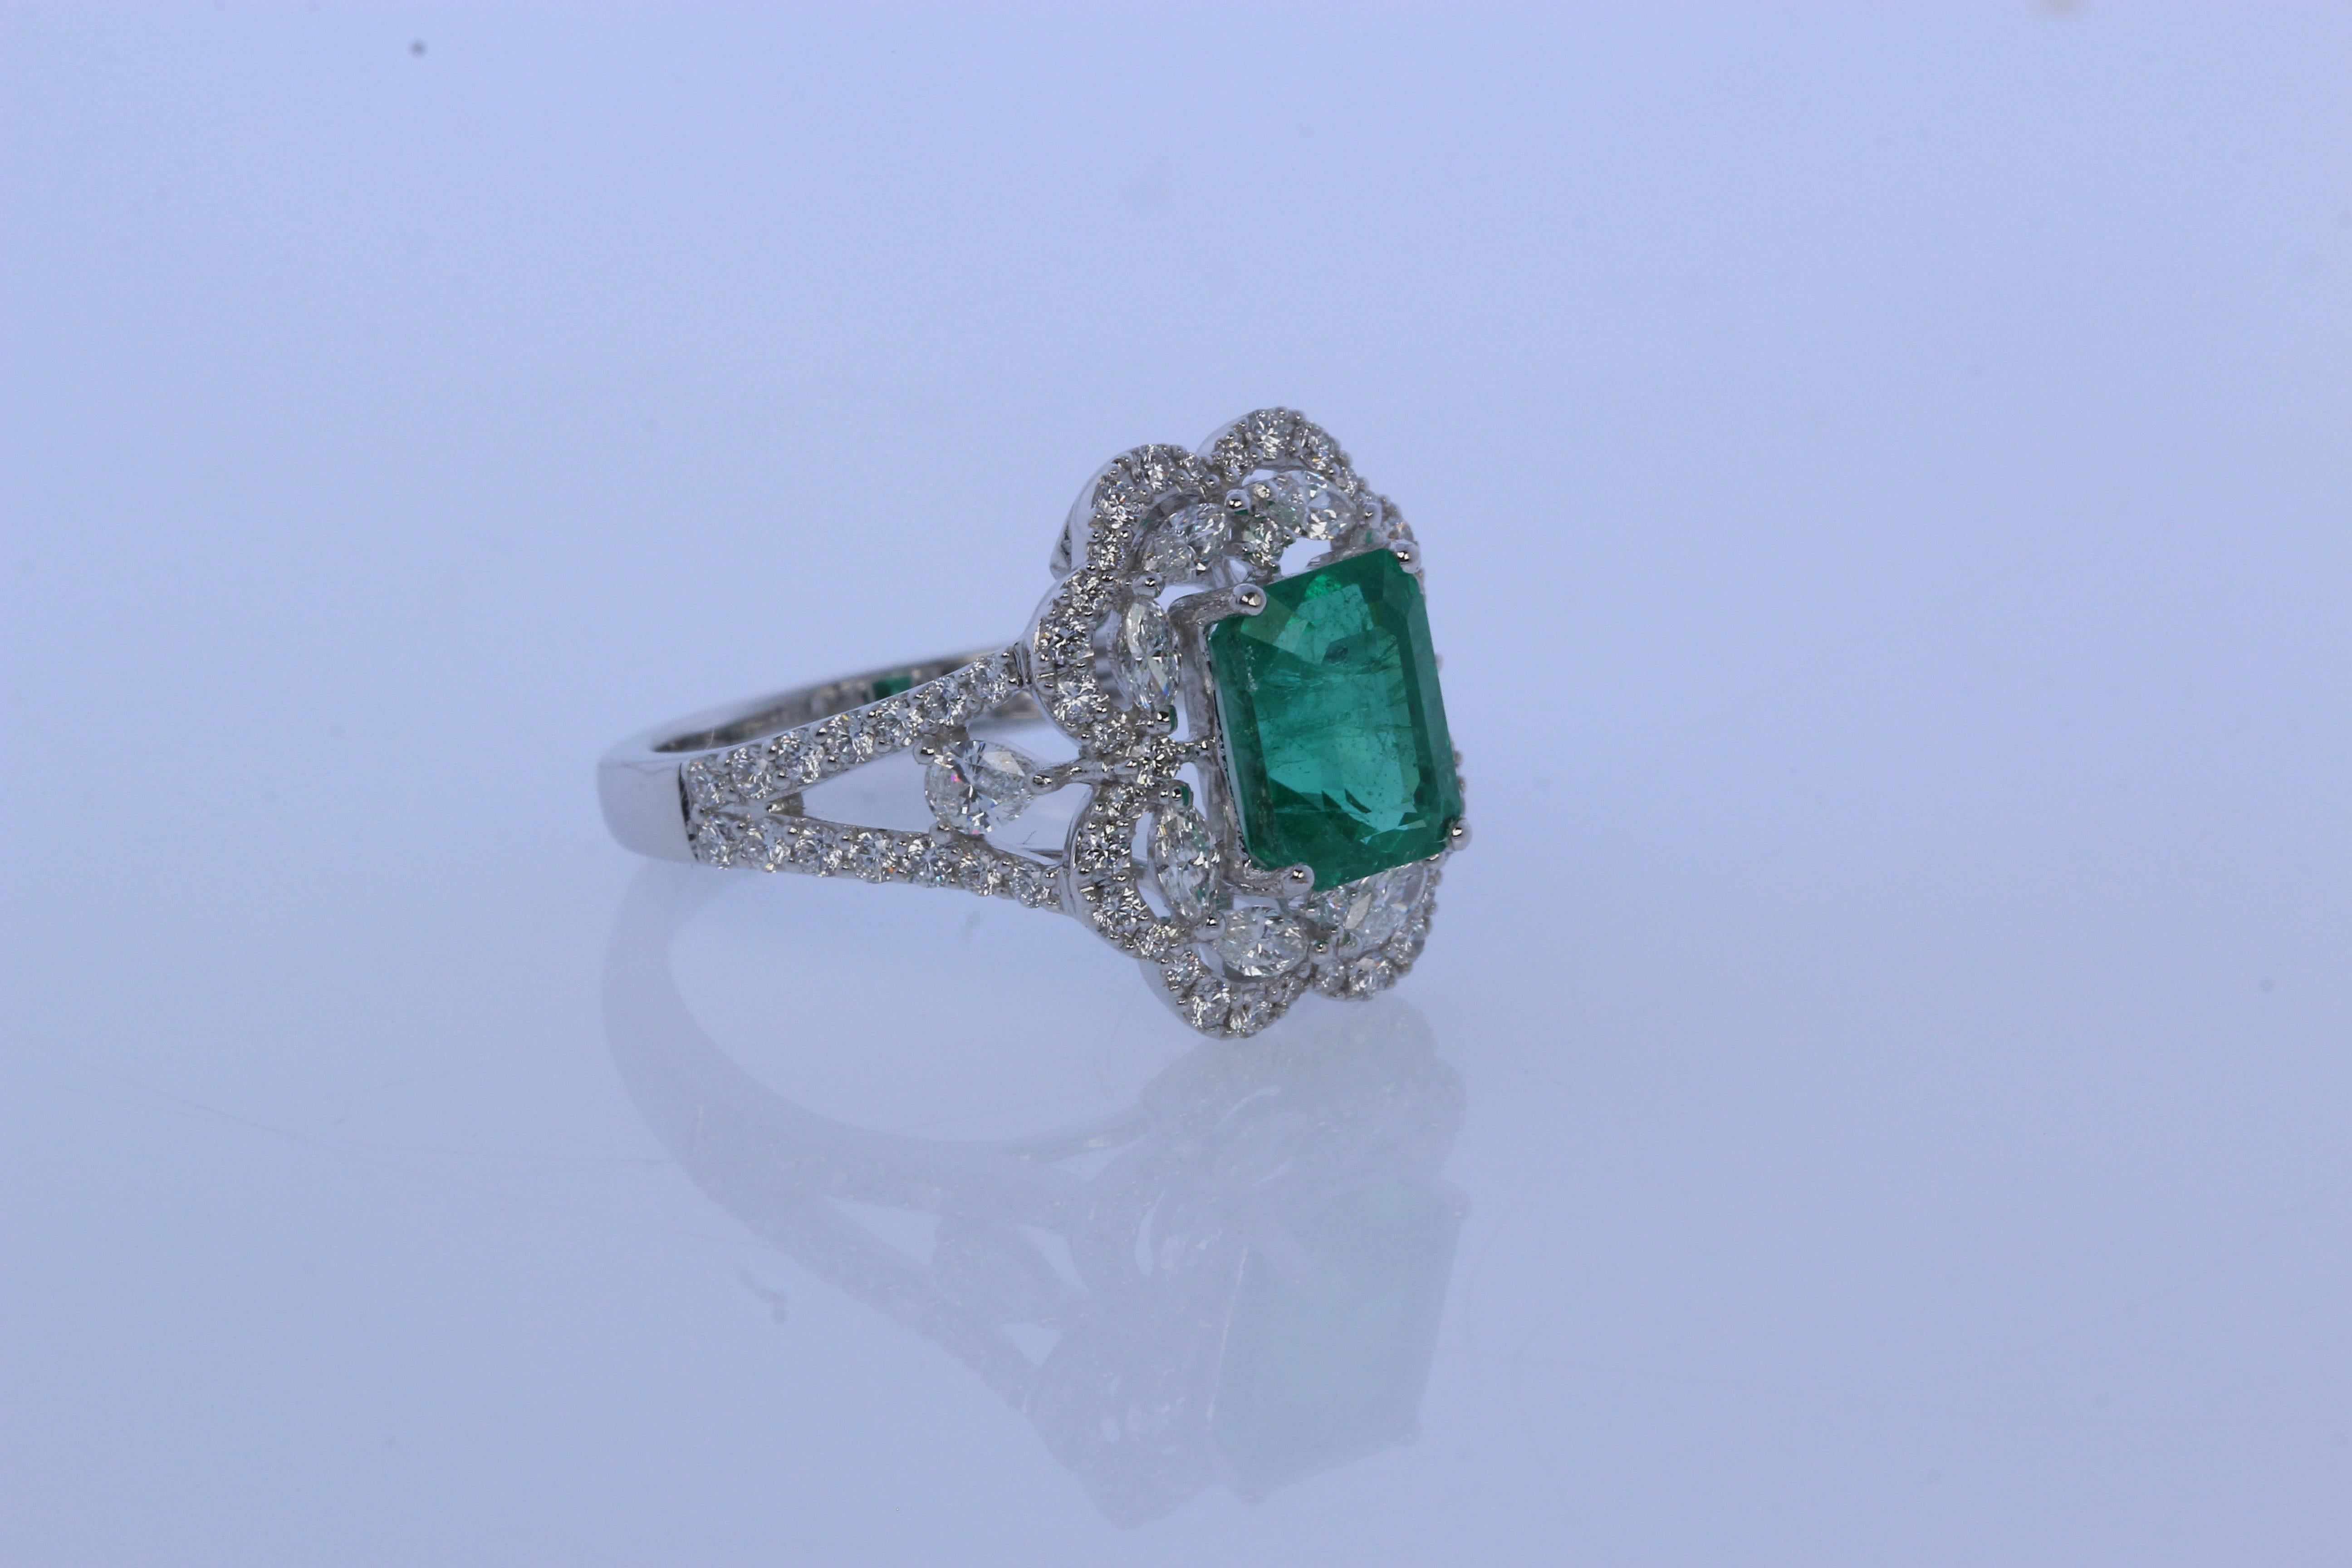 A brand new emerald and diamond ring in 18K gold. A 2.05 carat emerald cushion is set in the center of this ring, which is surrounded by 0.35 carat diamond marquise, 0.52 carat diamond round and 0.16 carat diamond pear. This ring weighs 5.00 grams